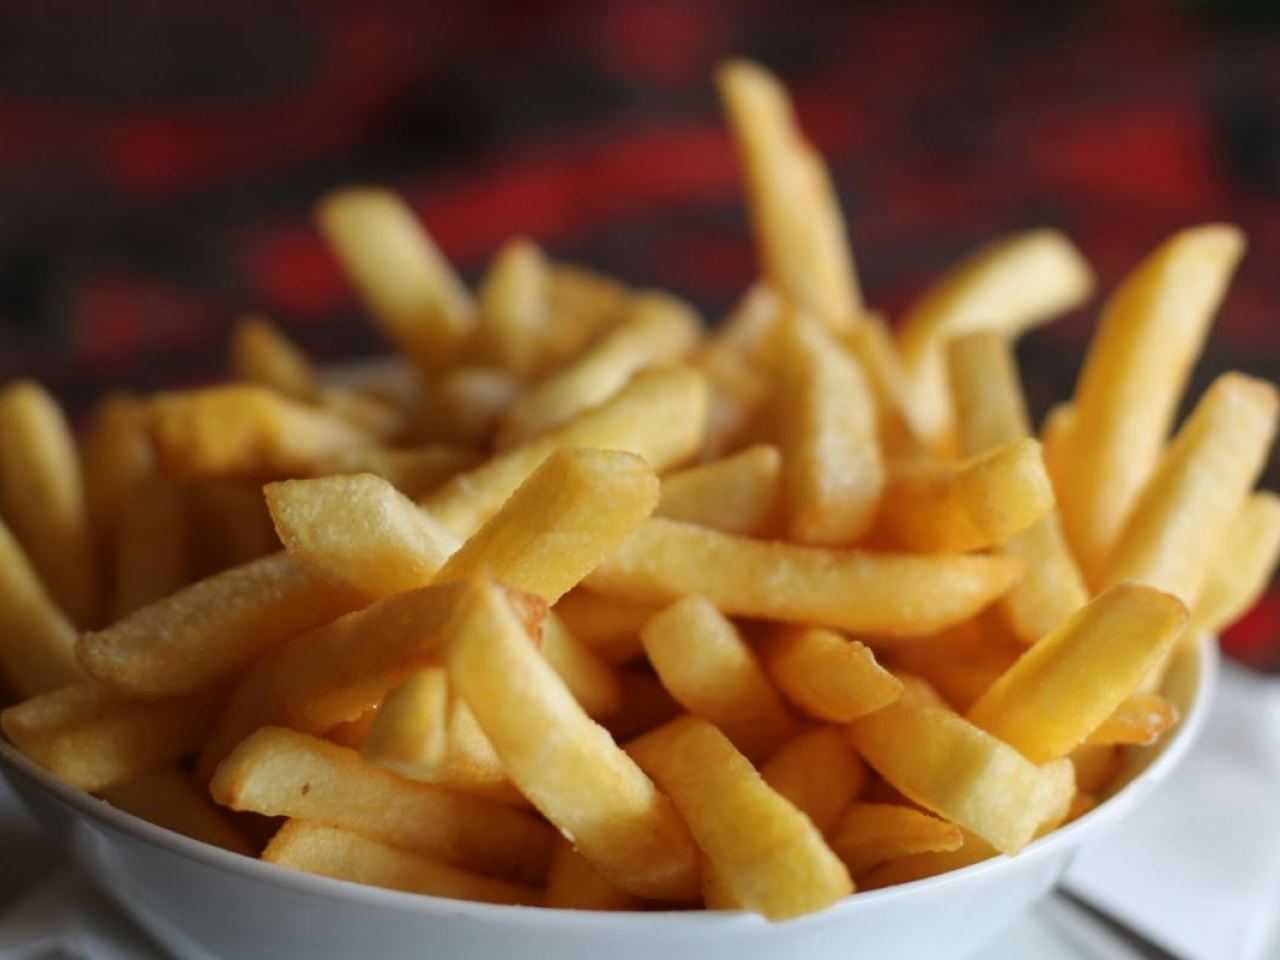 Enjoy the perfect healthy alternative to French fries: discover the recipe here